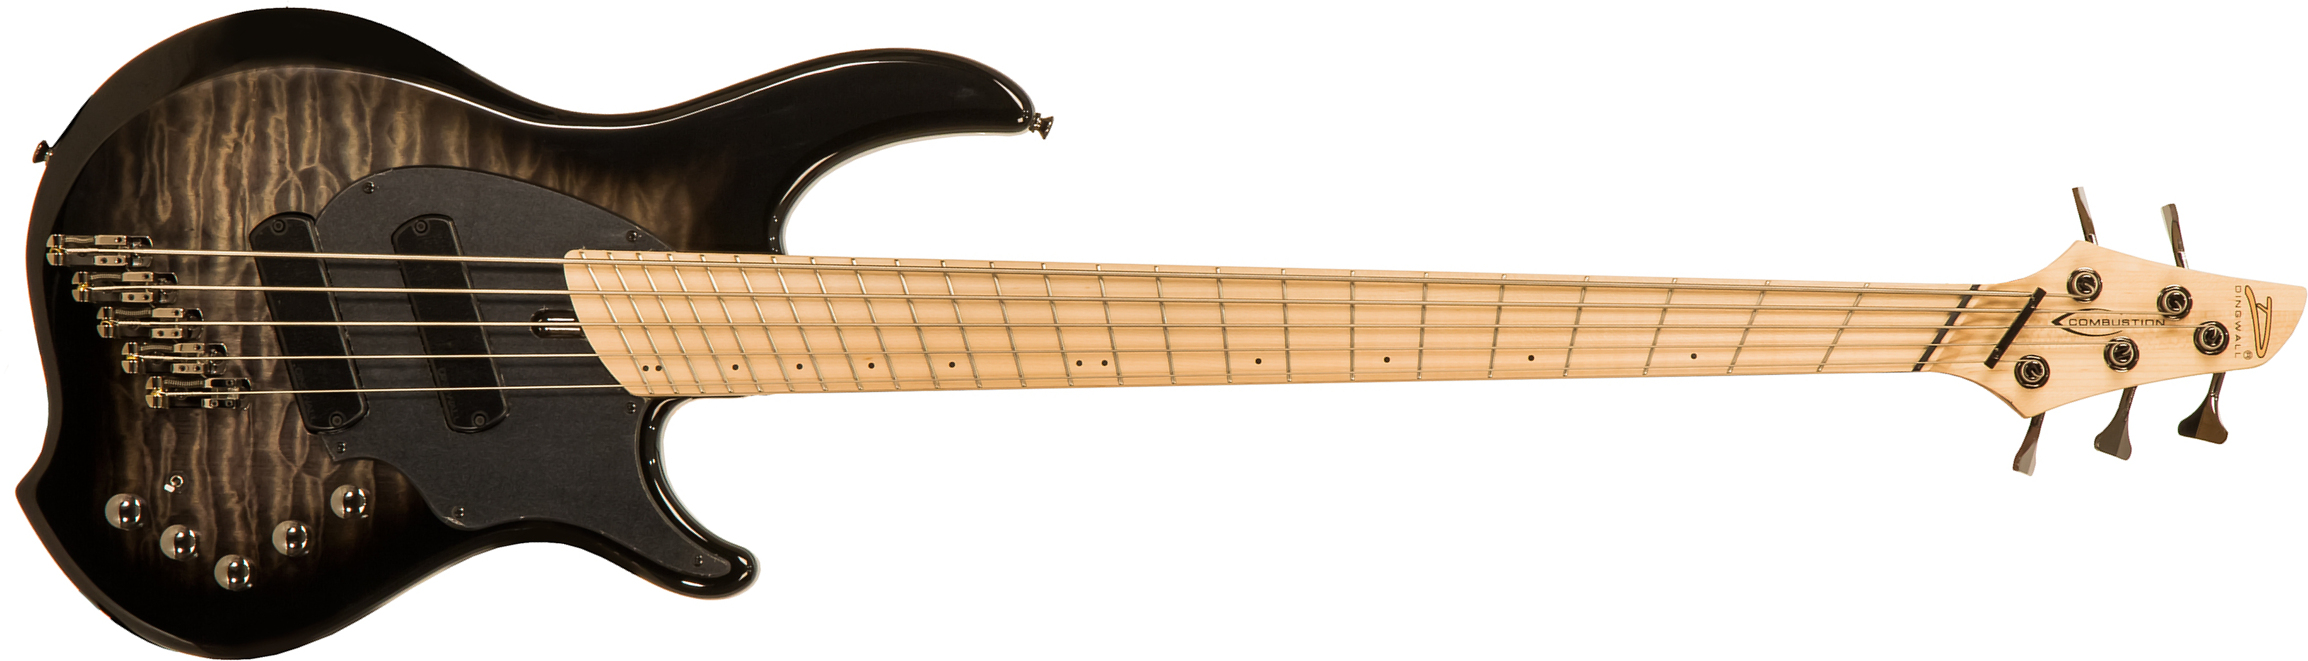 Dingwall Combustion Cb2 5c 2pu Active Mn - 2-tone Blackburst - Solidbody E-bass - Main picture